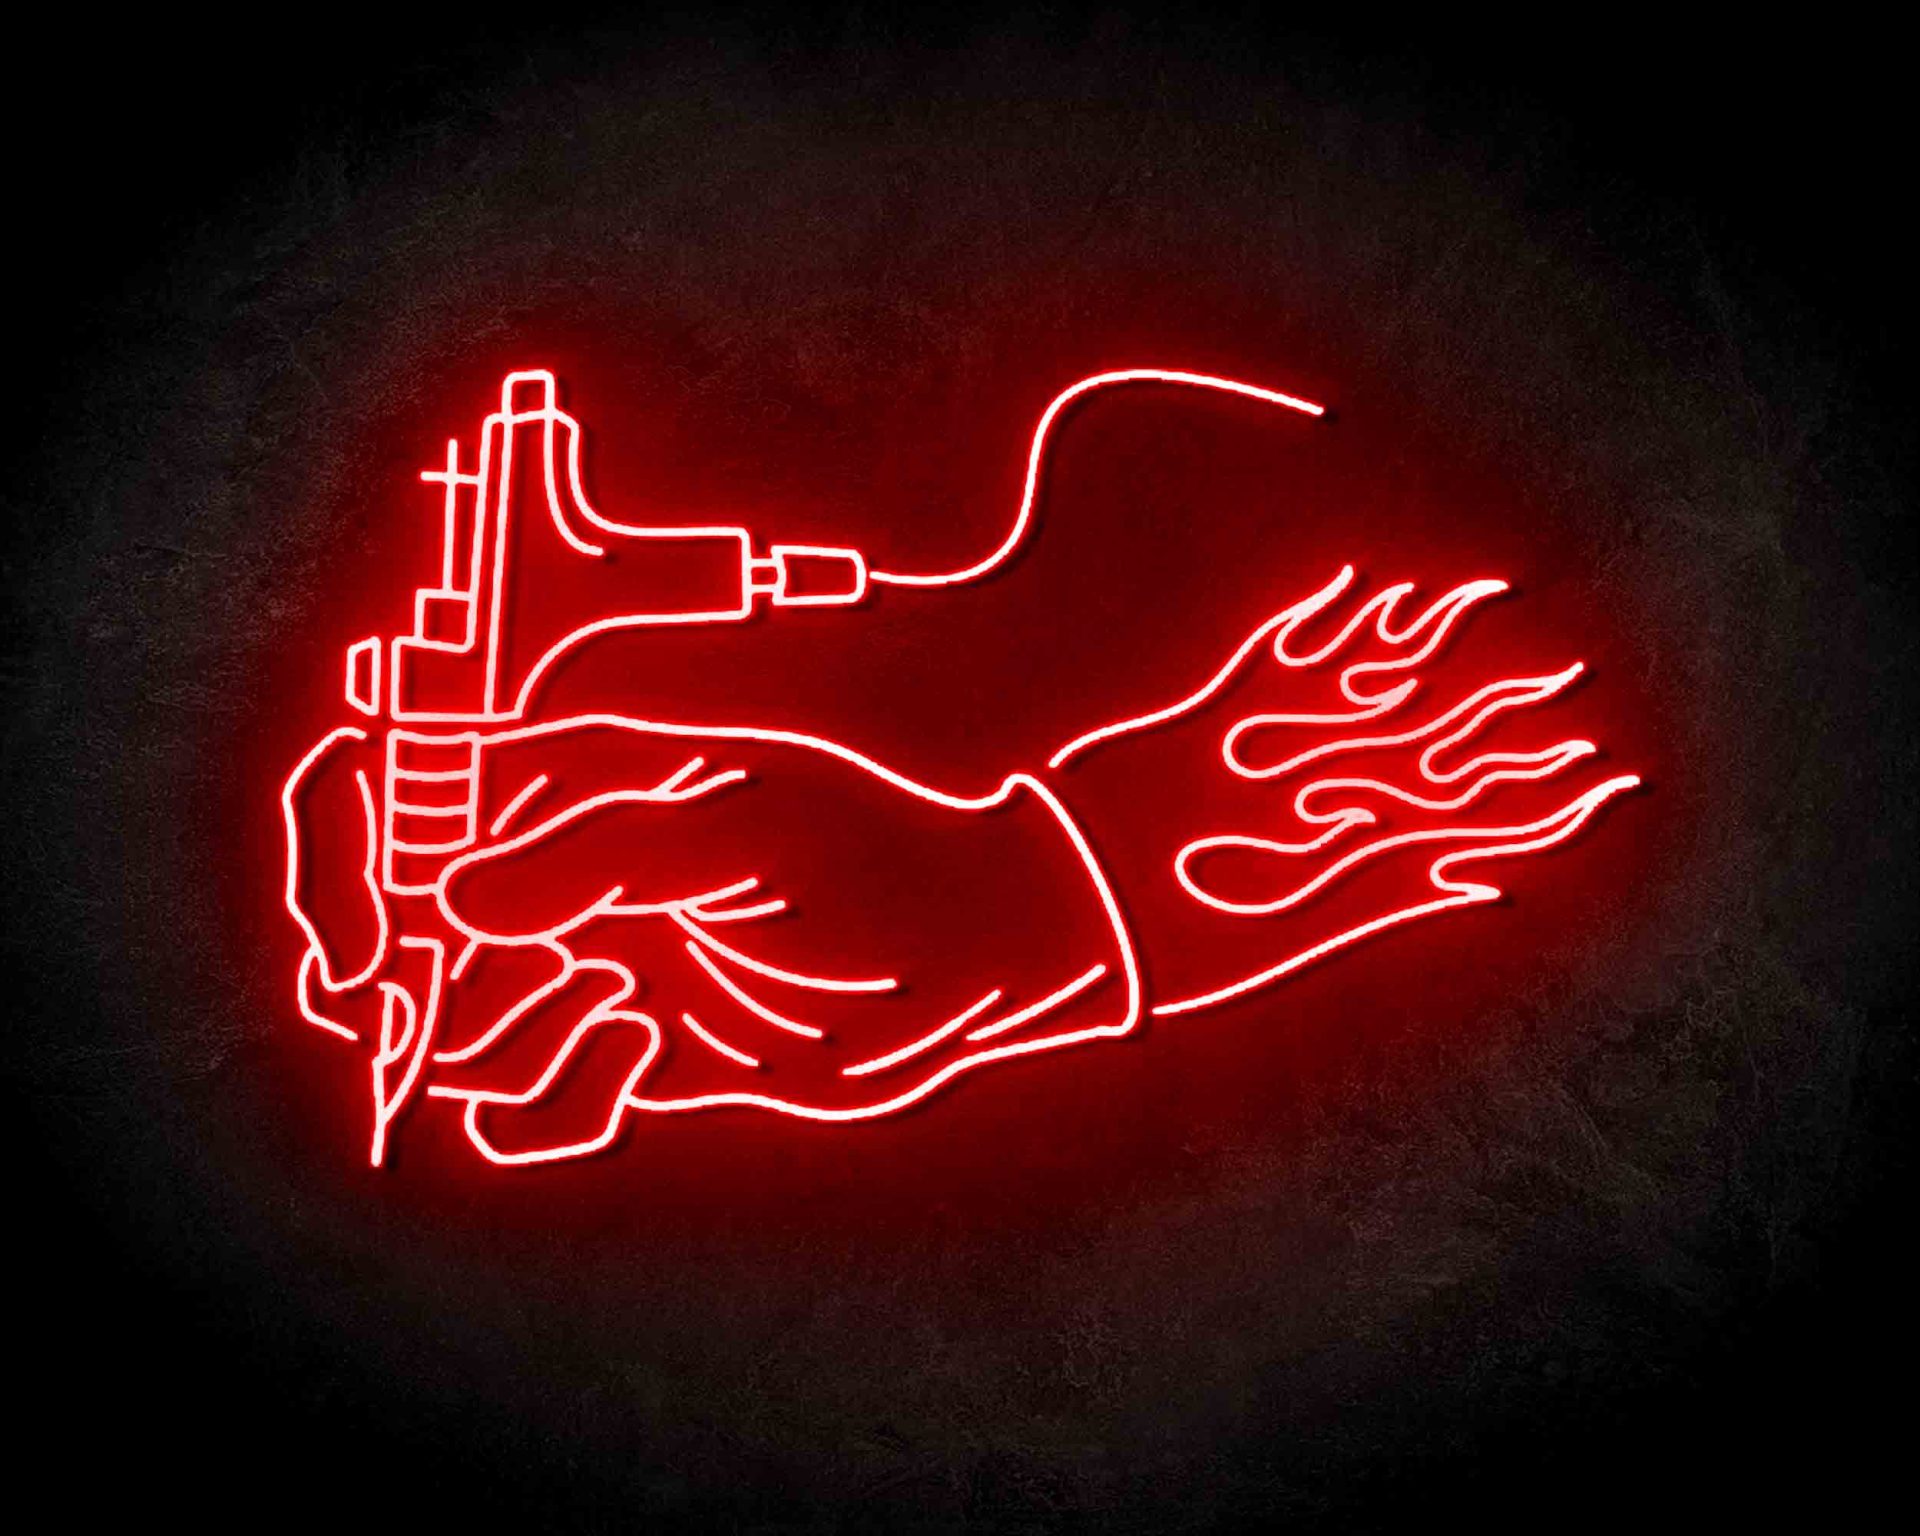 Neon Sign Tattoo Very Cool For Tattoo Parlors